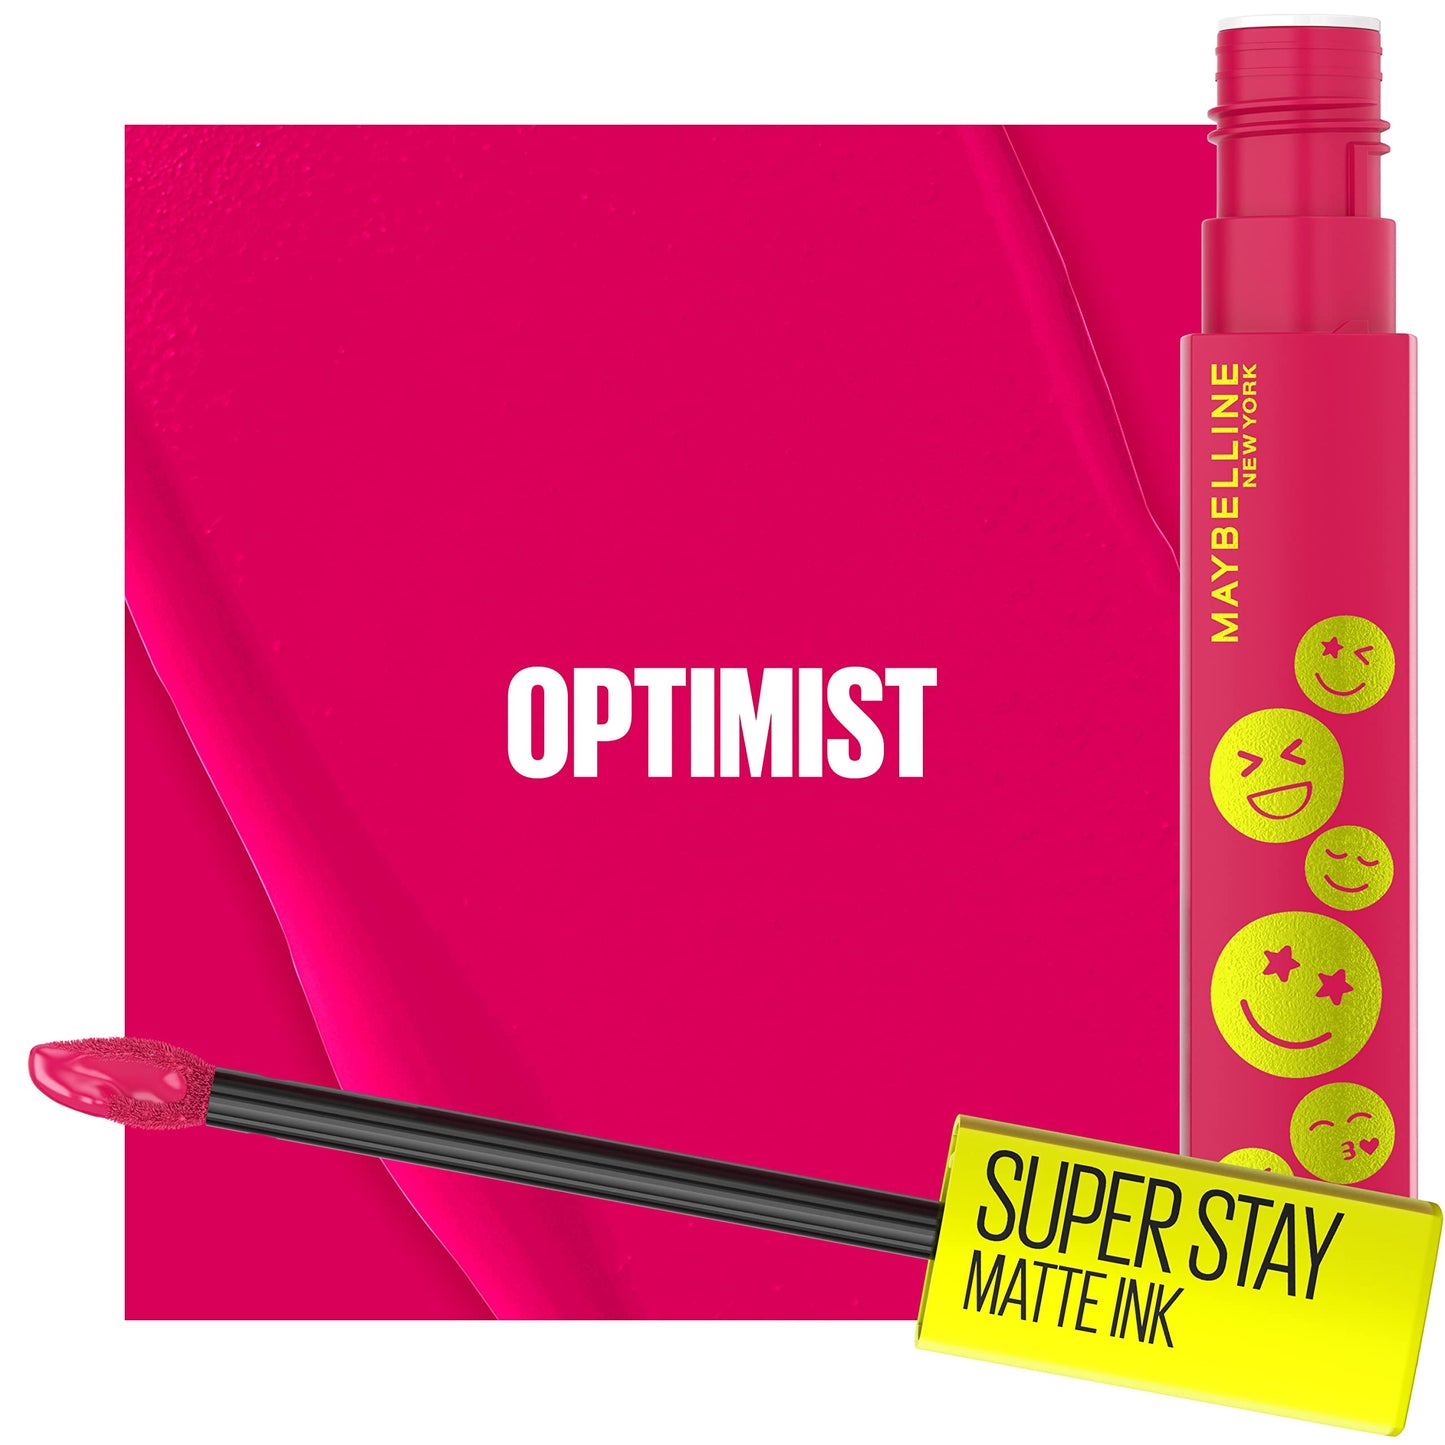 Maybelline Super Stay Matte Ink Liquid Lip Color, Moodmakers Lipstick Collection, Long Lasting, Transfer Proof Lip Makeup, Optimist, Pink, 1 Count